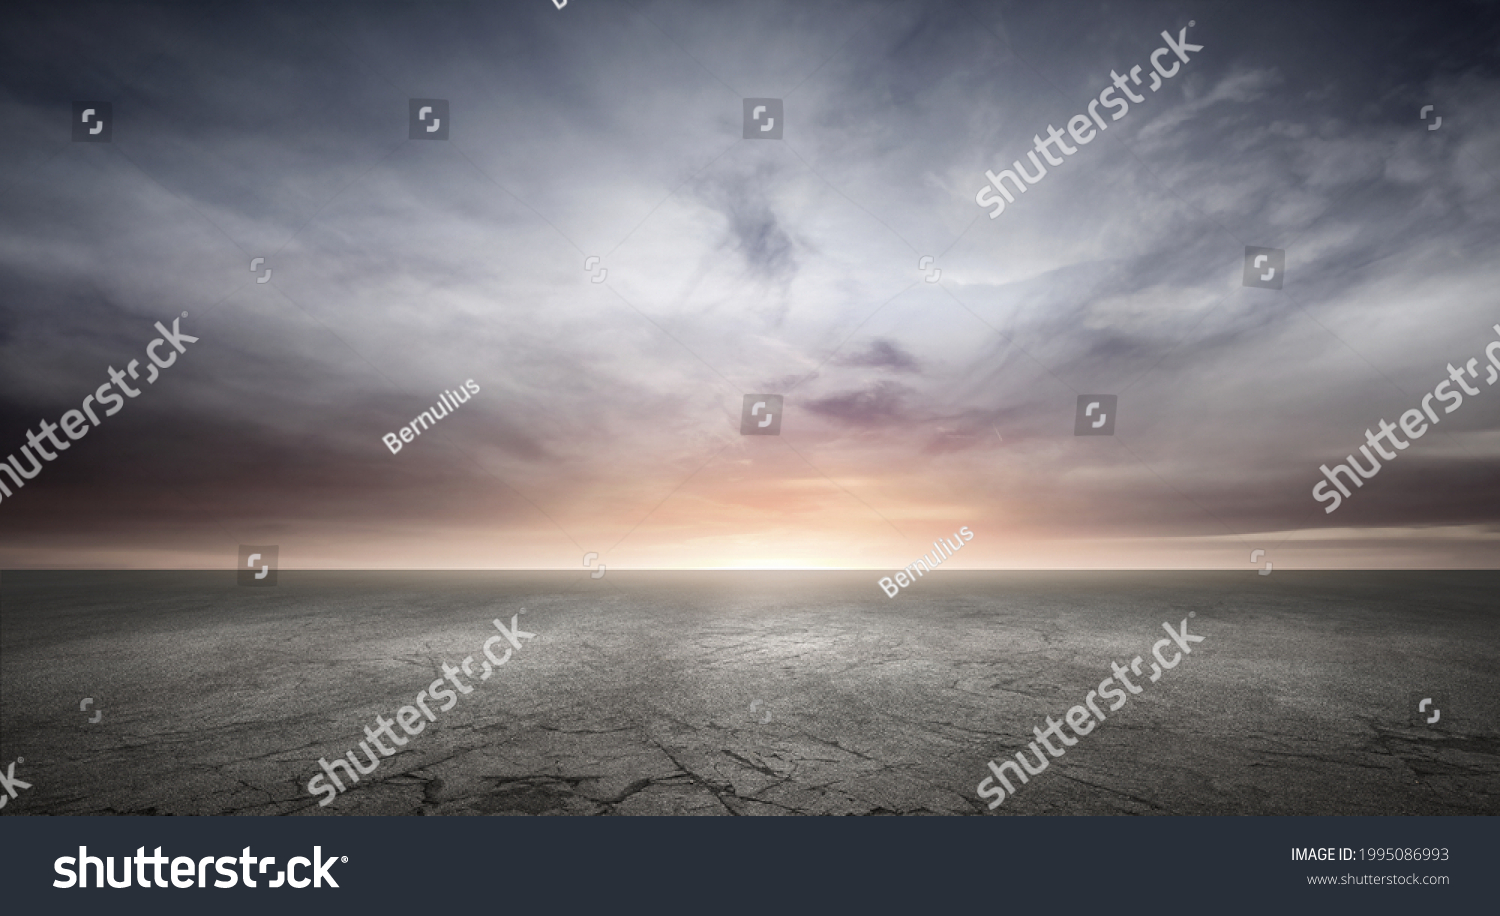 Dark Concrete Floor Background with Dramatic Sky Clouds and Sunset Horizon #1995086993